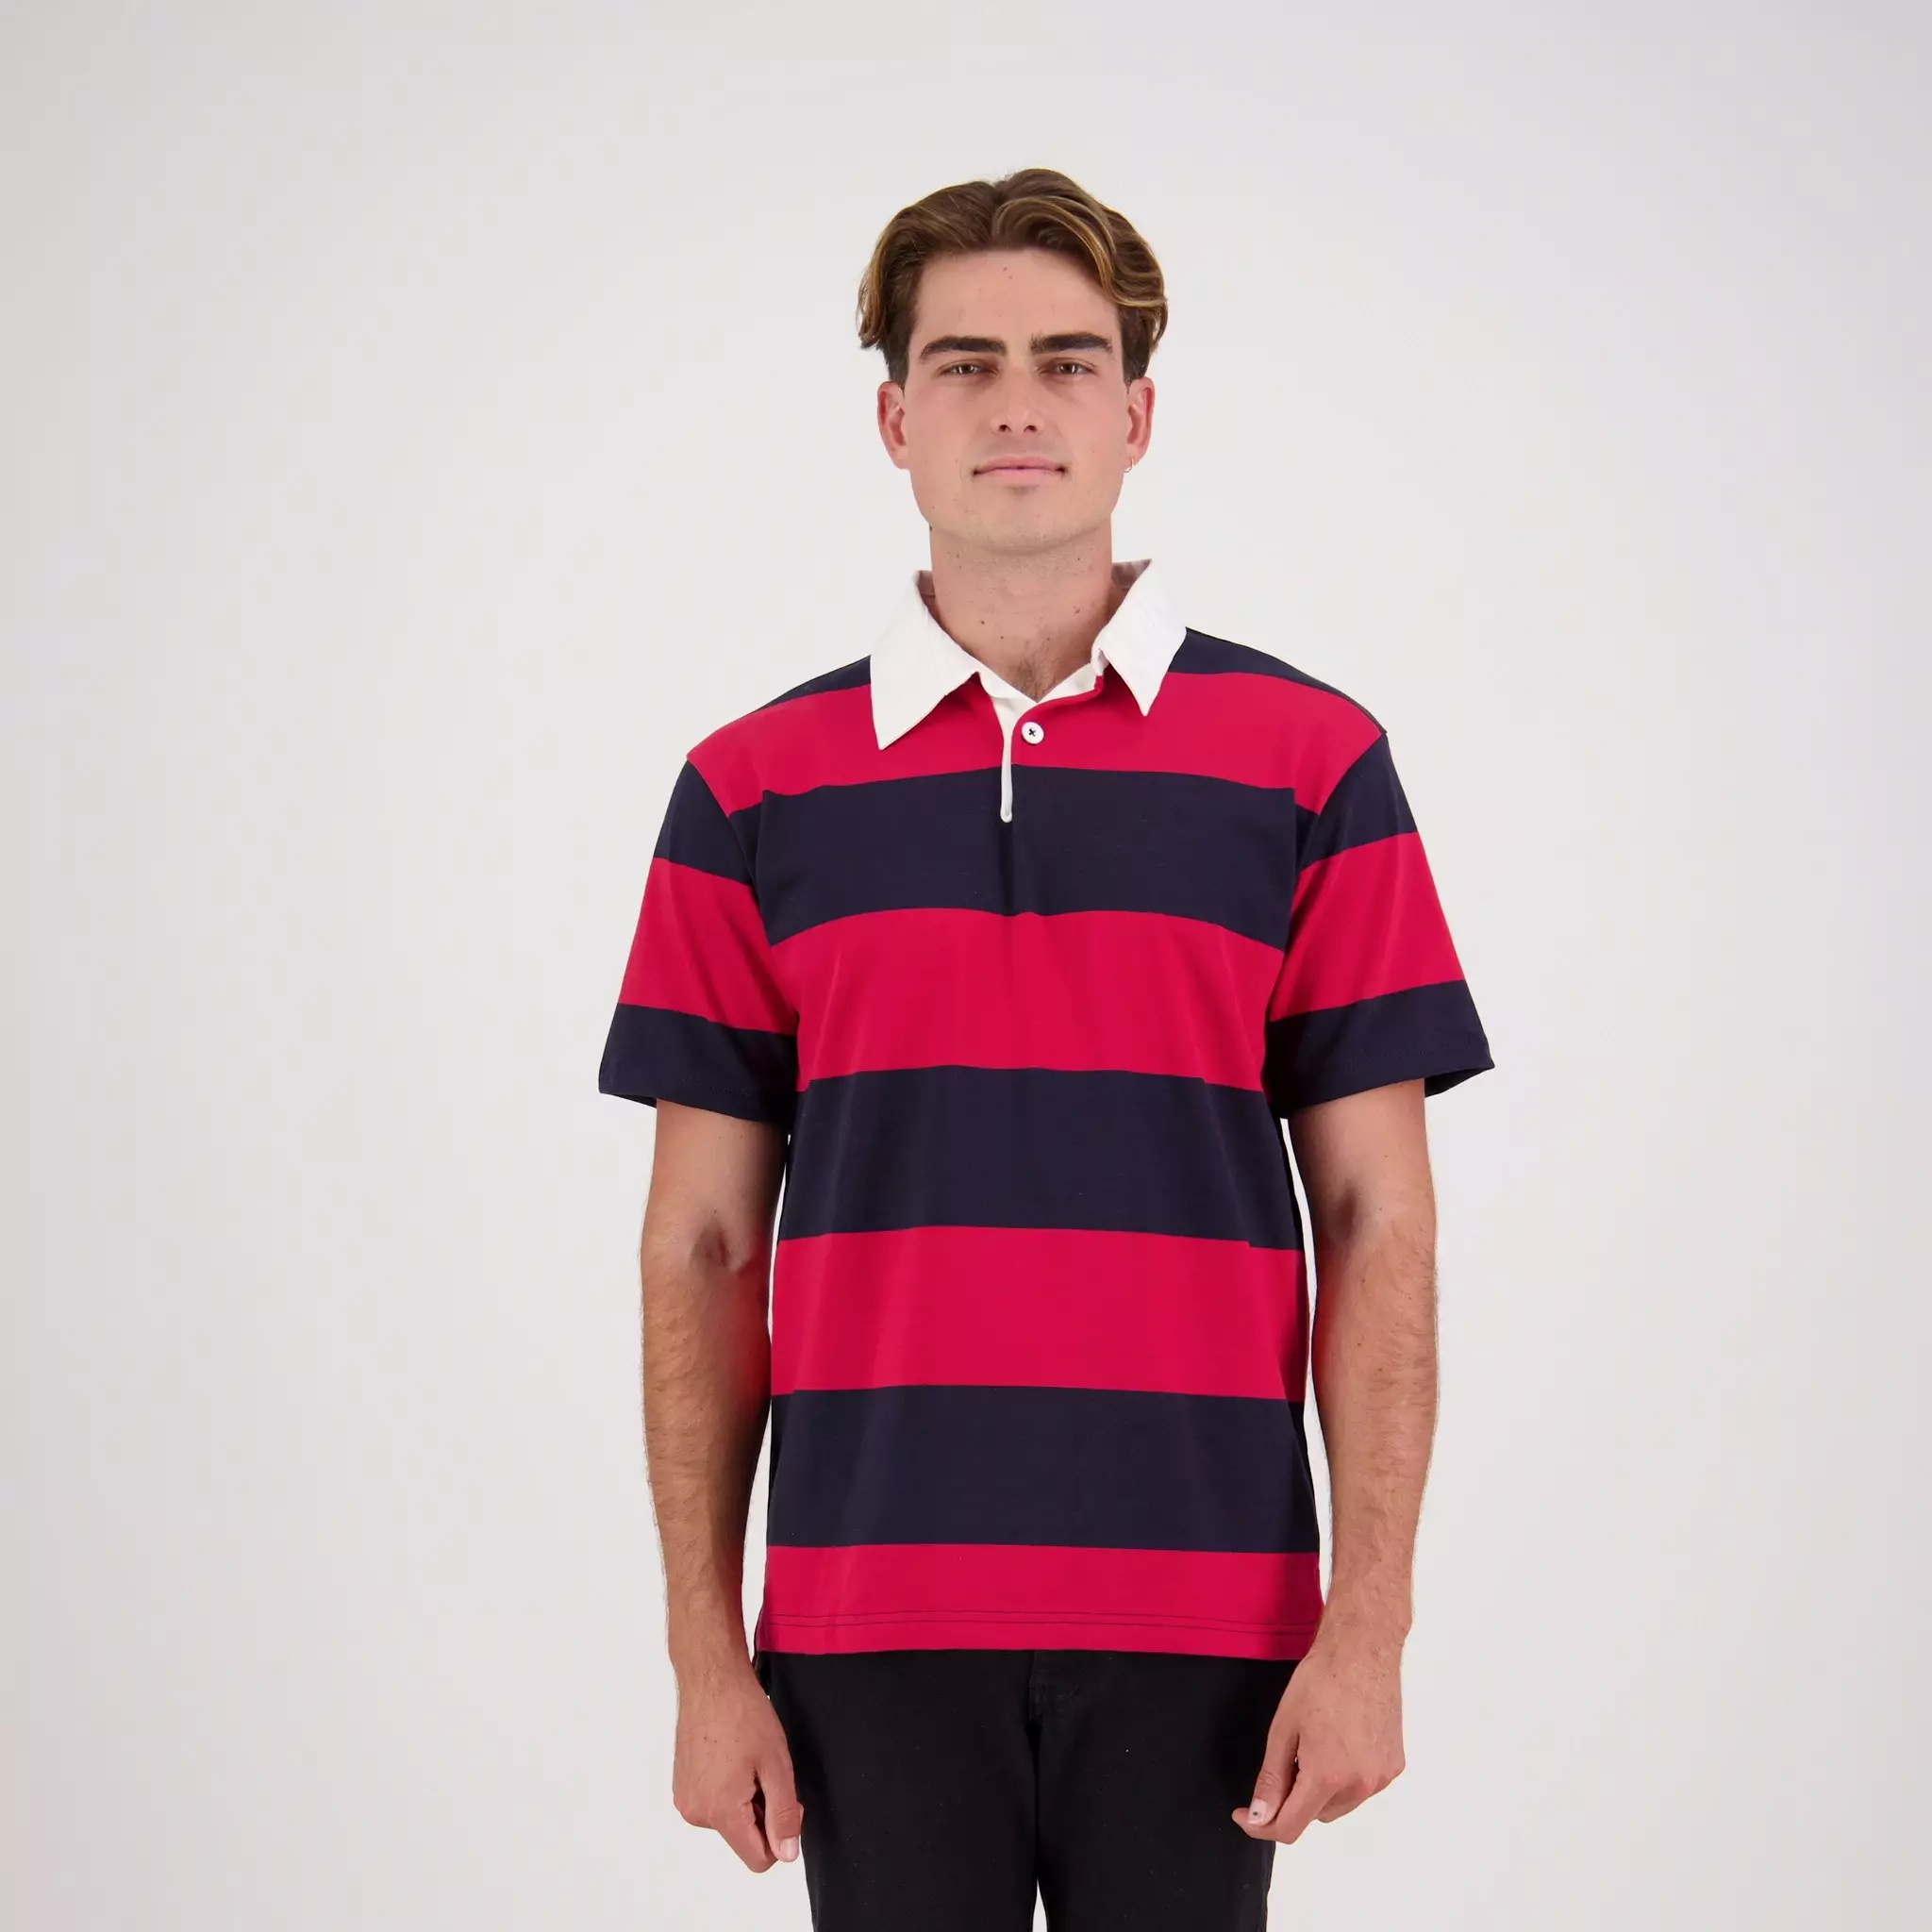 Cloke Short-Sleeved Striped Rugby Jersey